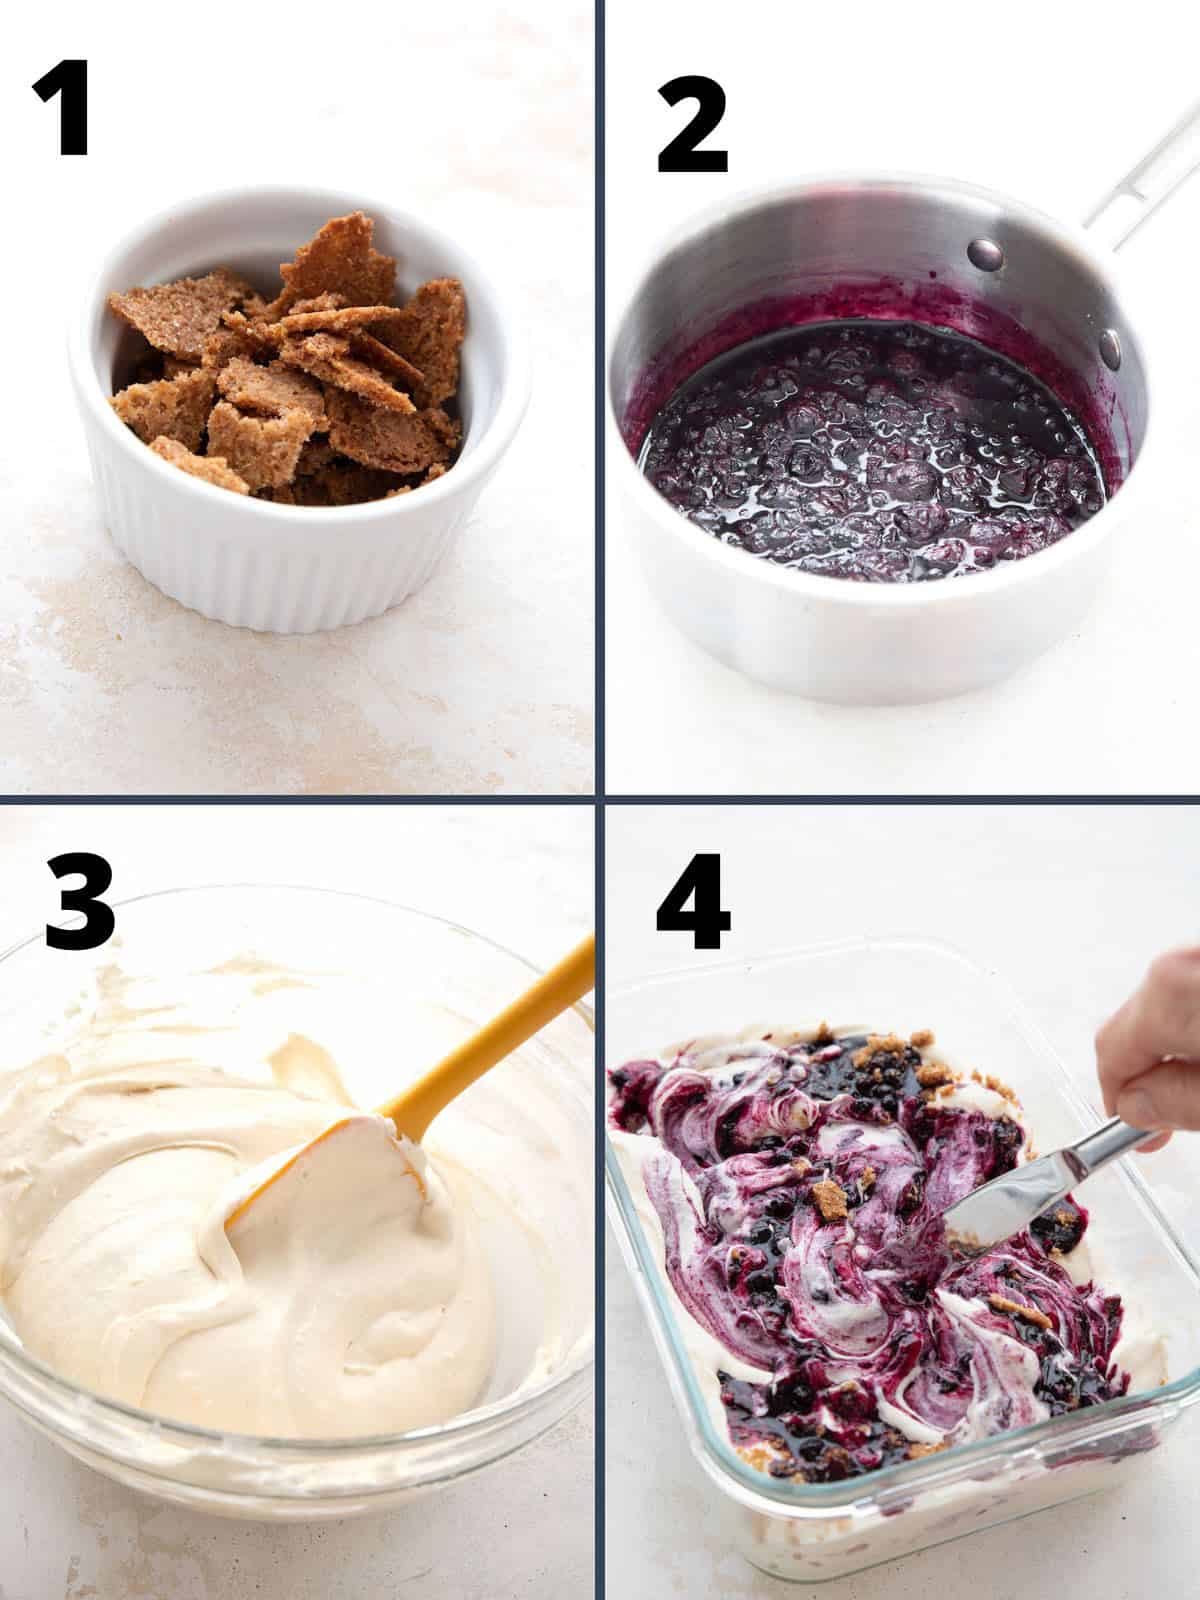 A collage of four images showing the steps for making Keto Blueberry Pie Ice Cream.